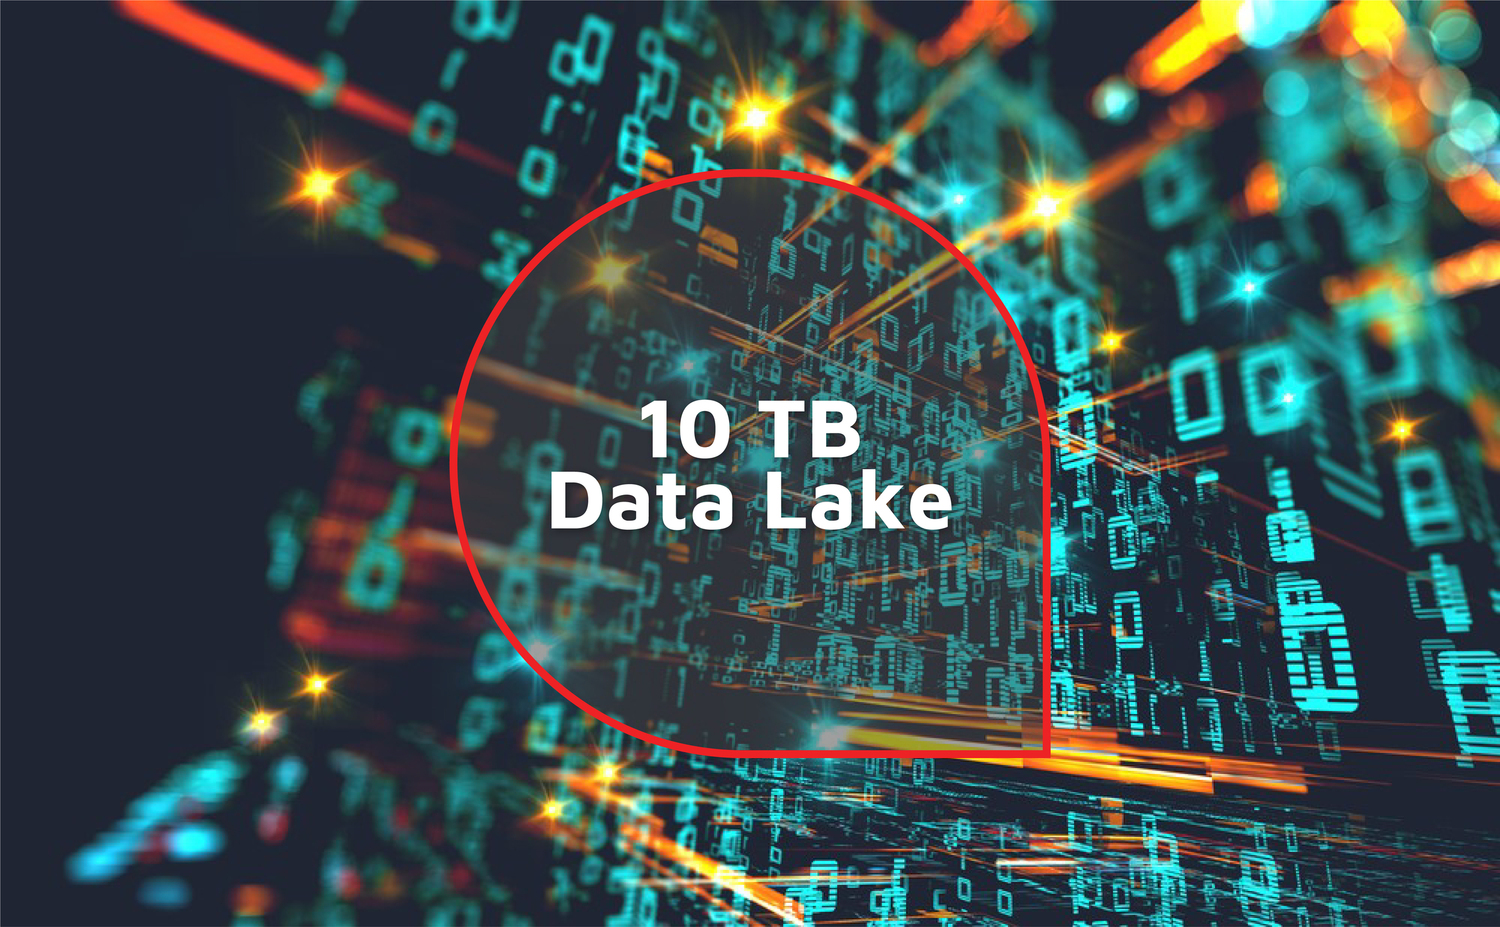 10 TB data lake for survey and near-real-time social media data